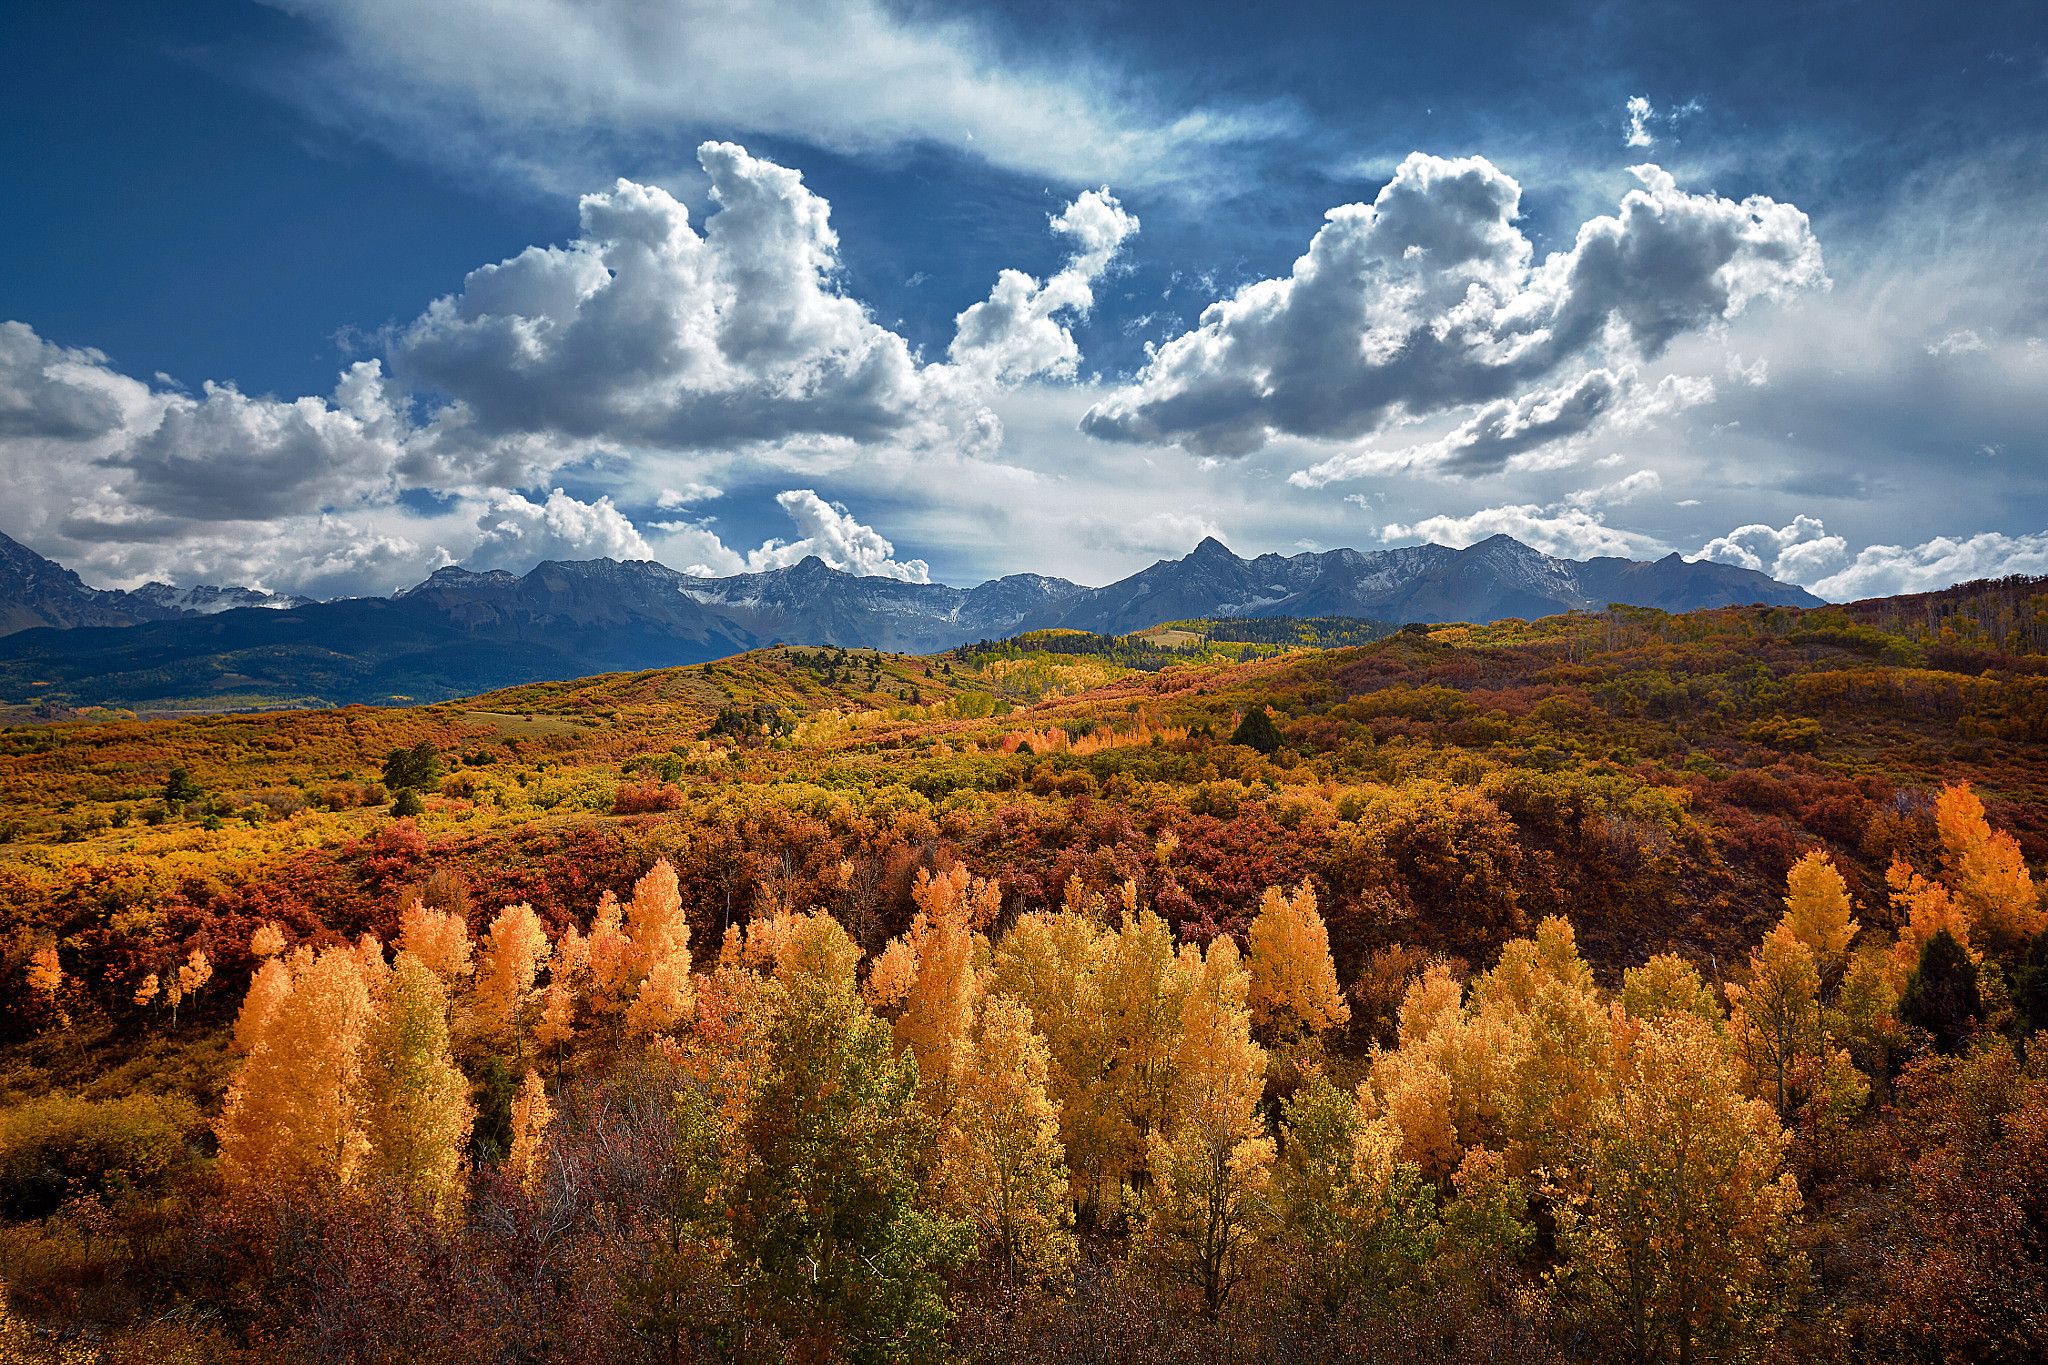 Golden Autumn wallpaper. Download wide photo of a beautiful natural scenery